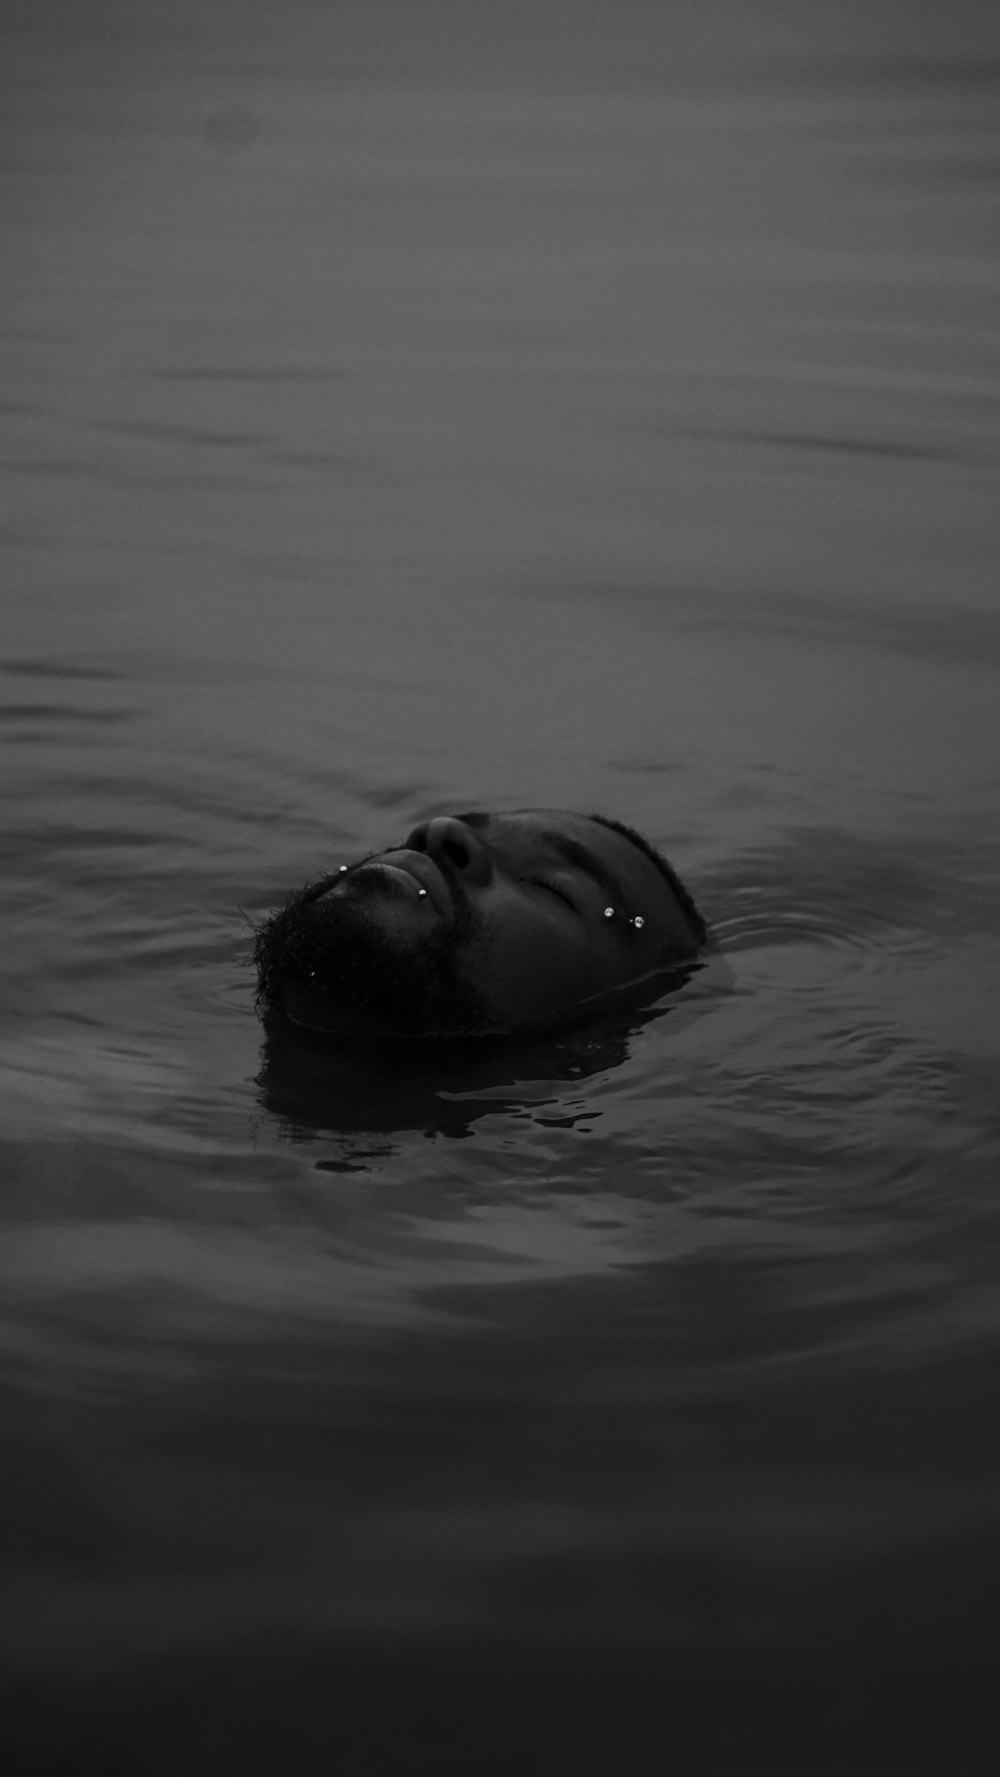 grayscale photo of man in water